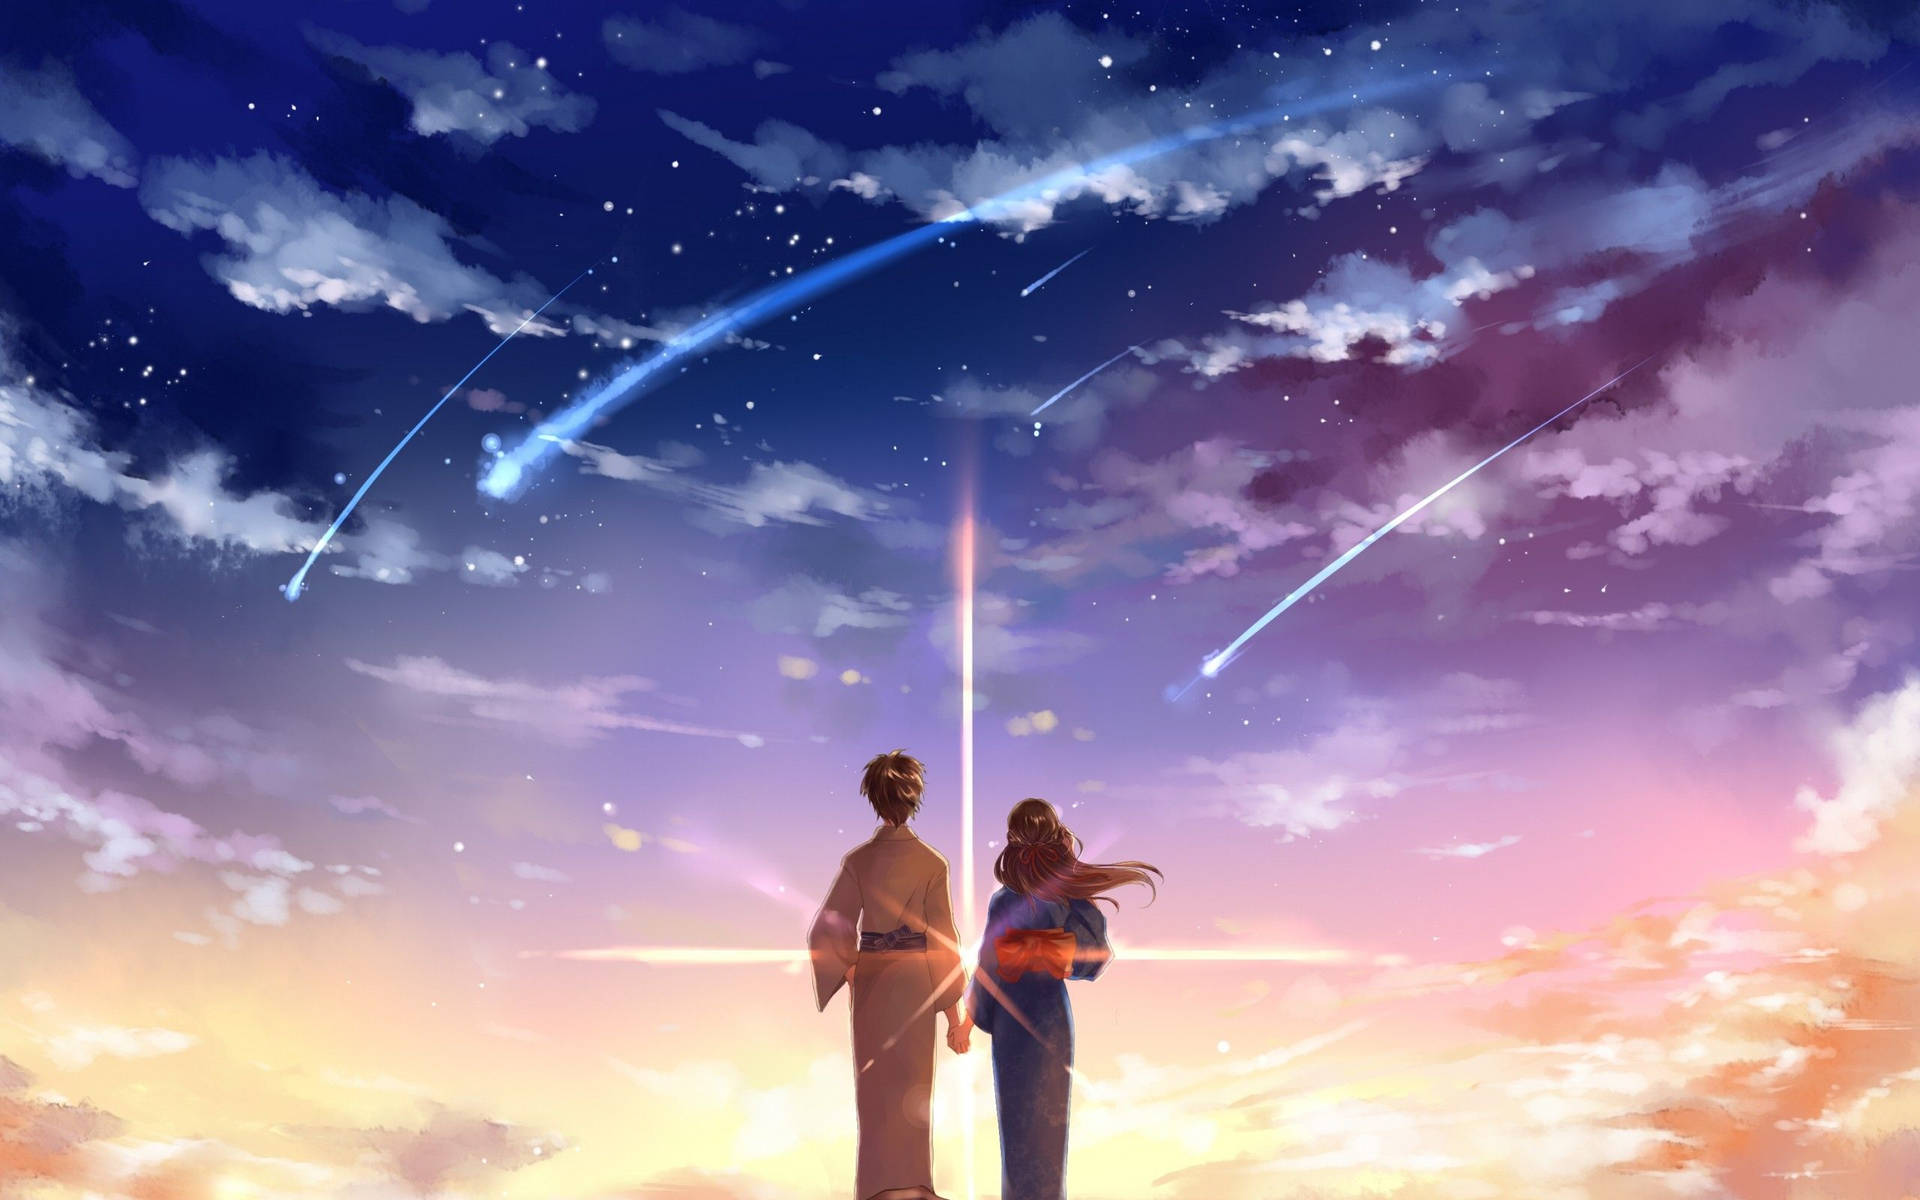 "Taki and Mitsuha in their traditional Japanese kimonos in the movie 'Your Name'" Wallpaper